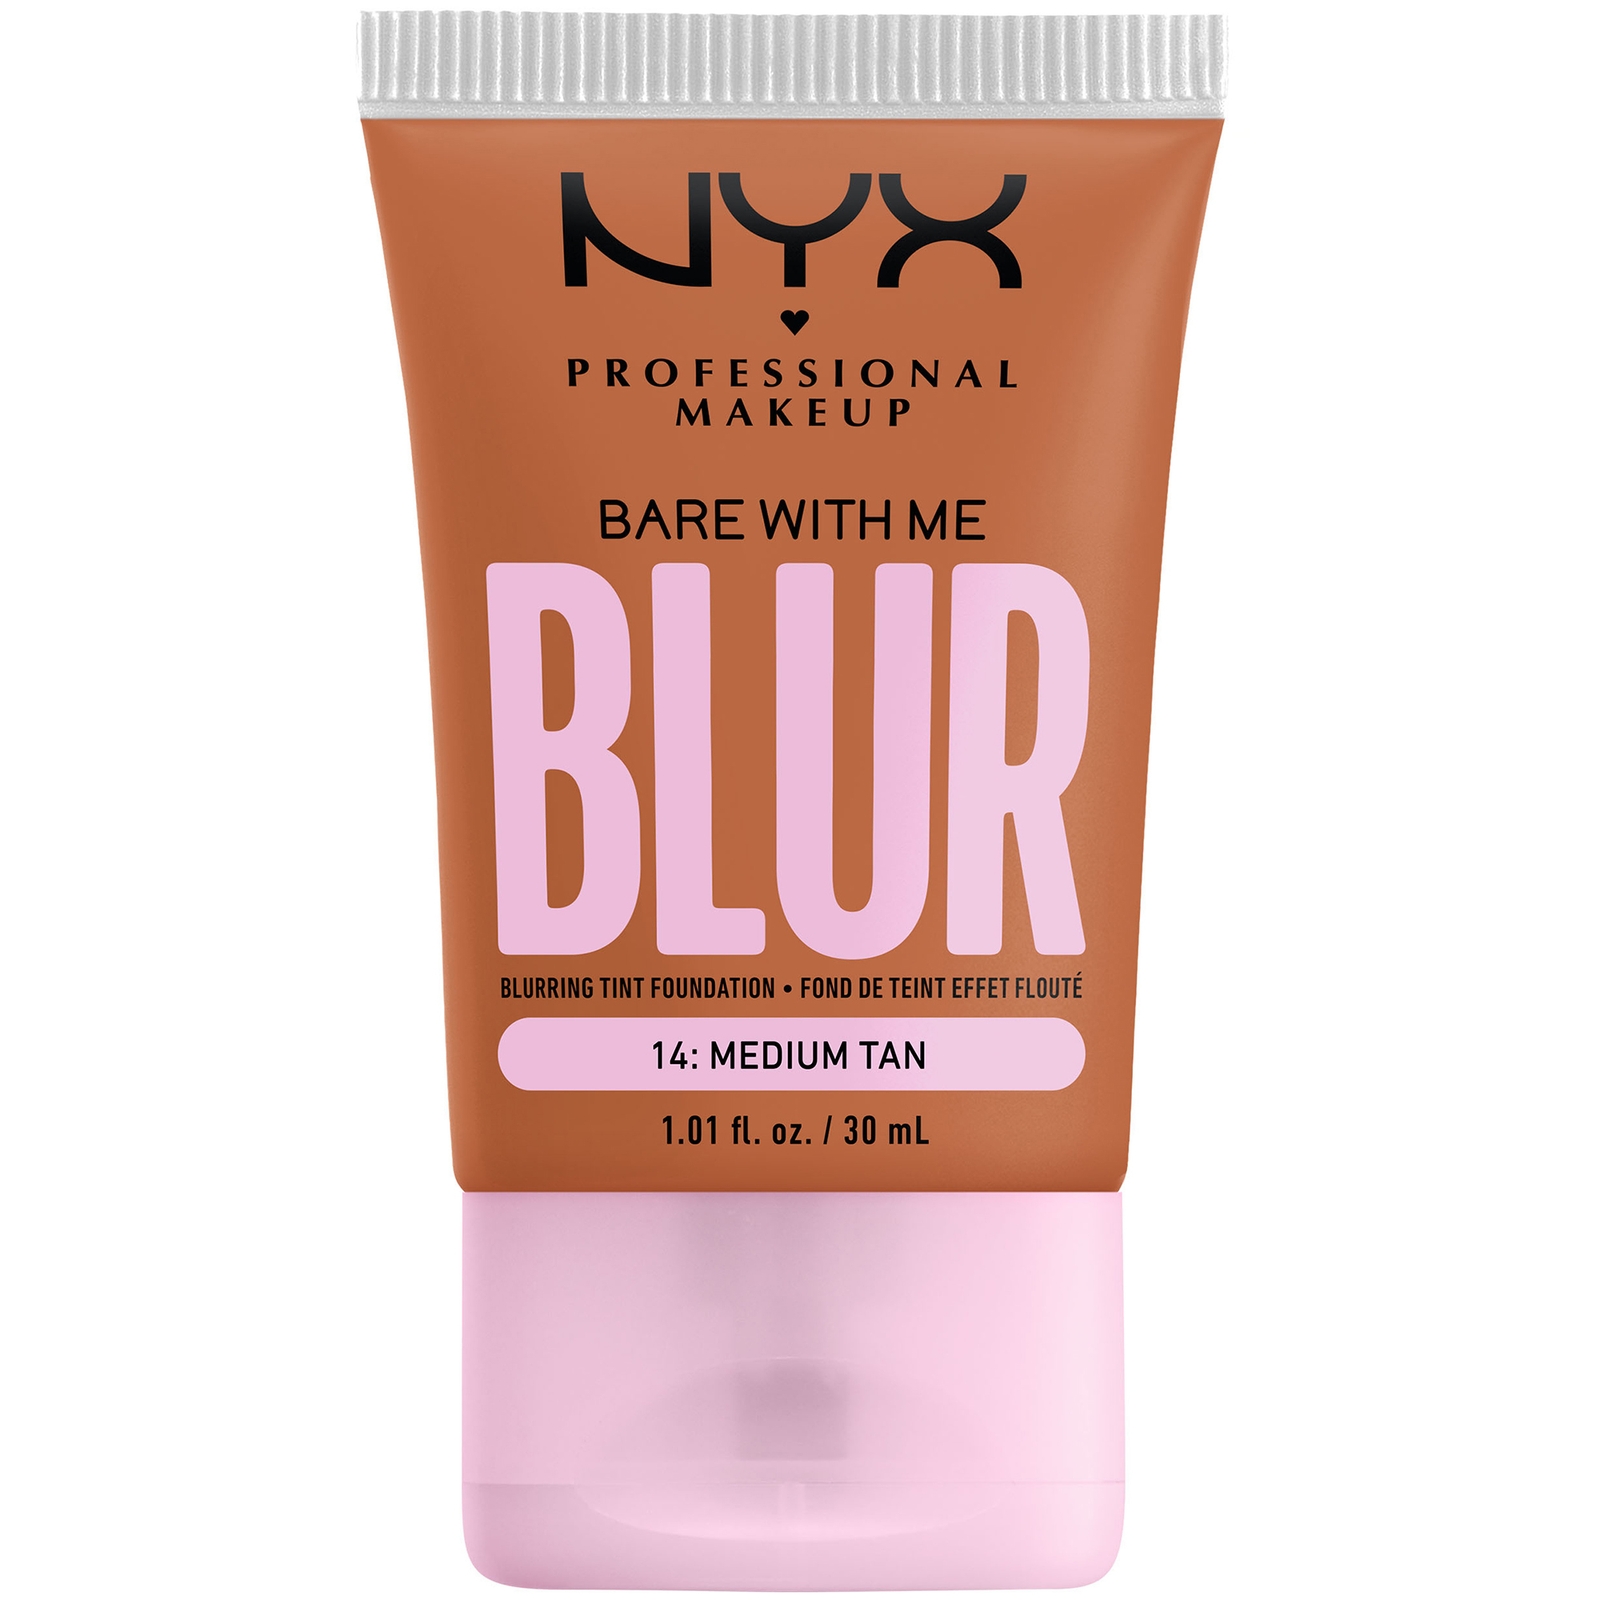 Nyx Professional Makeup Bare With Me Blur Tint Foundation 30ml (varios Shades) - Medium Tan In White